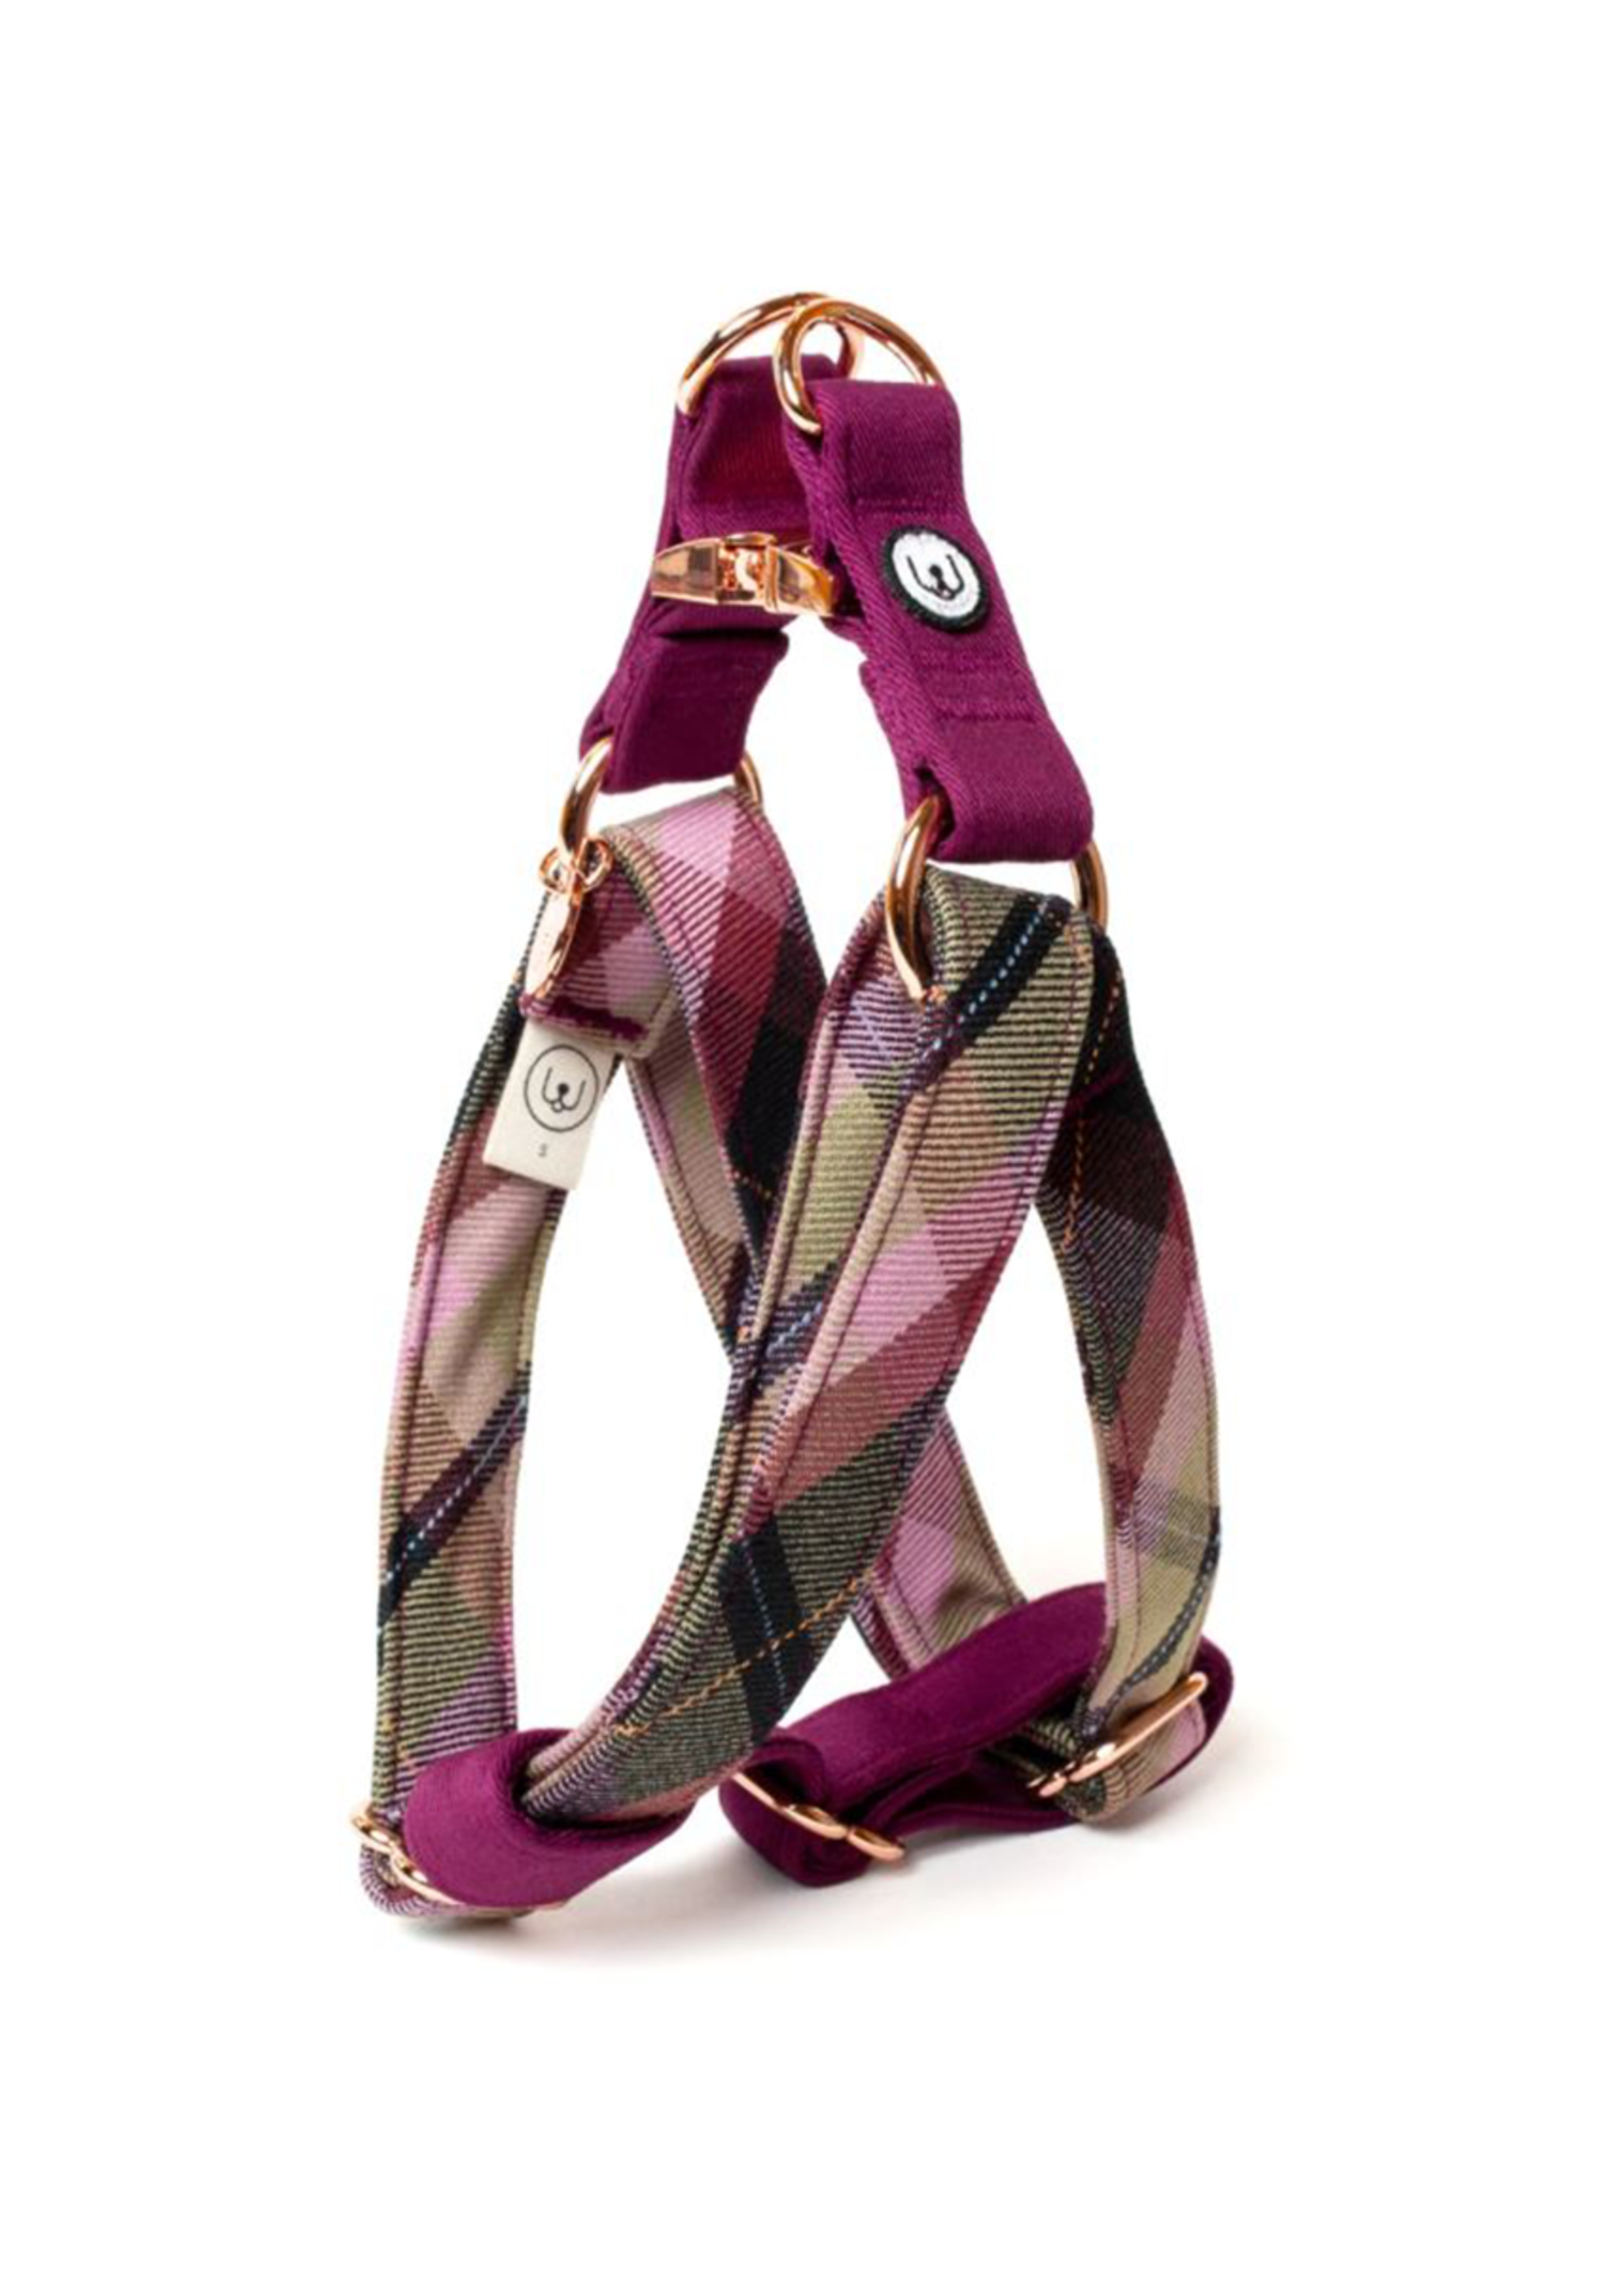 Eat Play Wag Eat Play Wag - Plum Plaid Step-In Harness